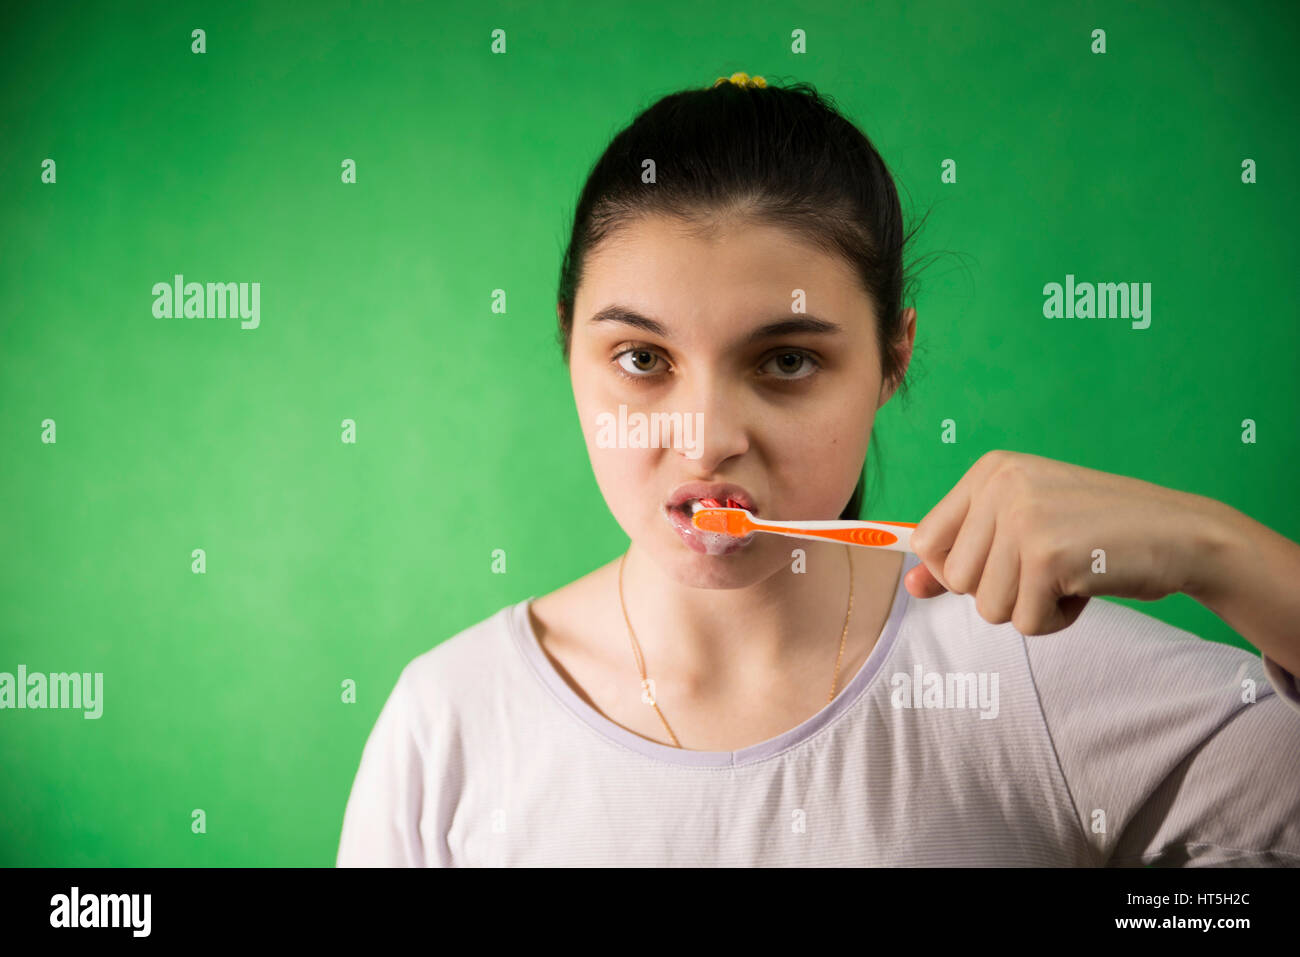 teen girl brushing her teeth with a toothbrush in nightie on a green chroma key background Stock Photo